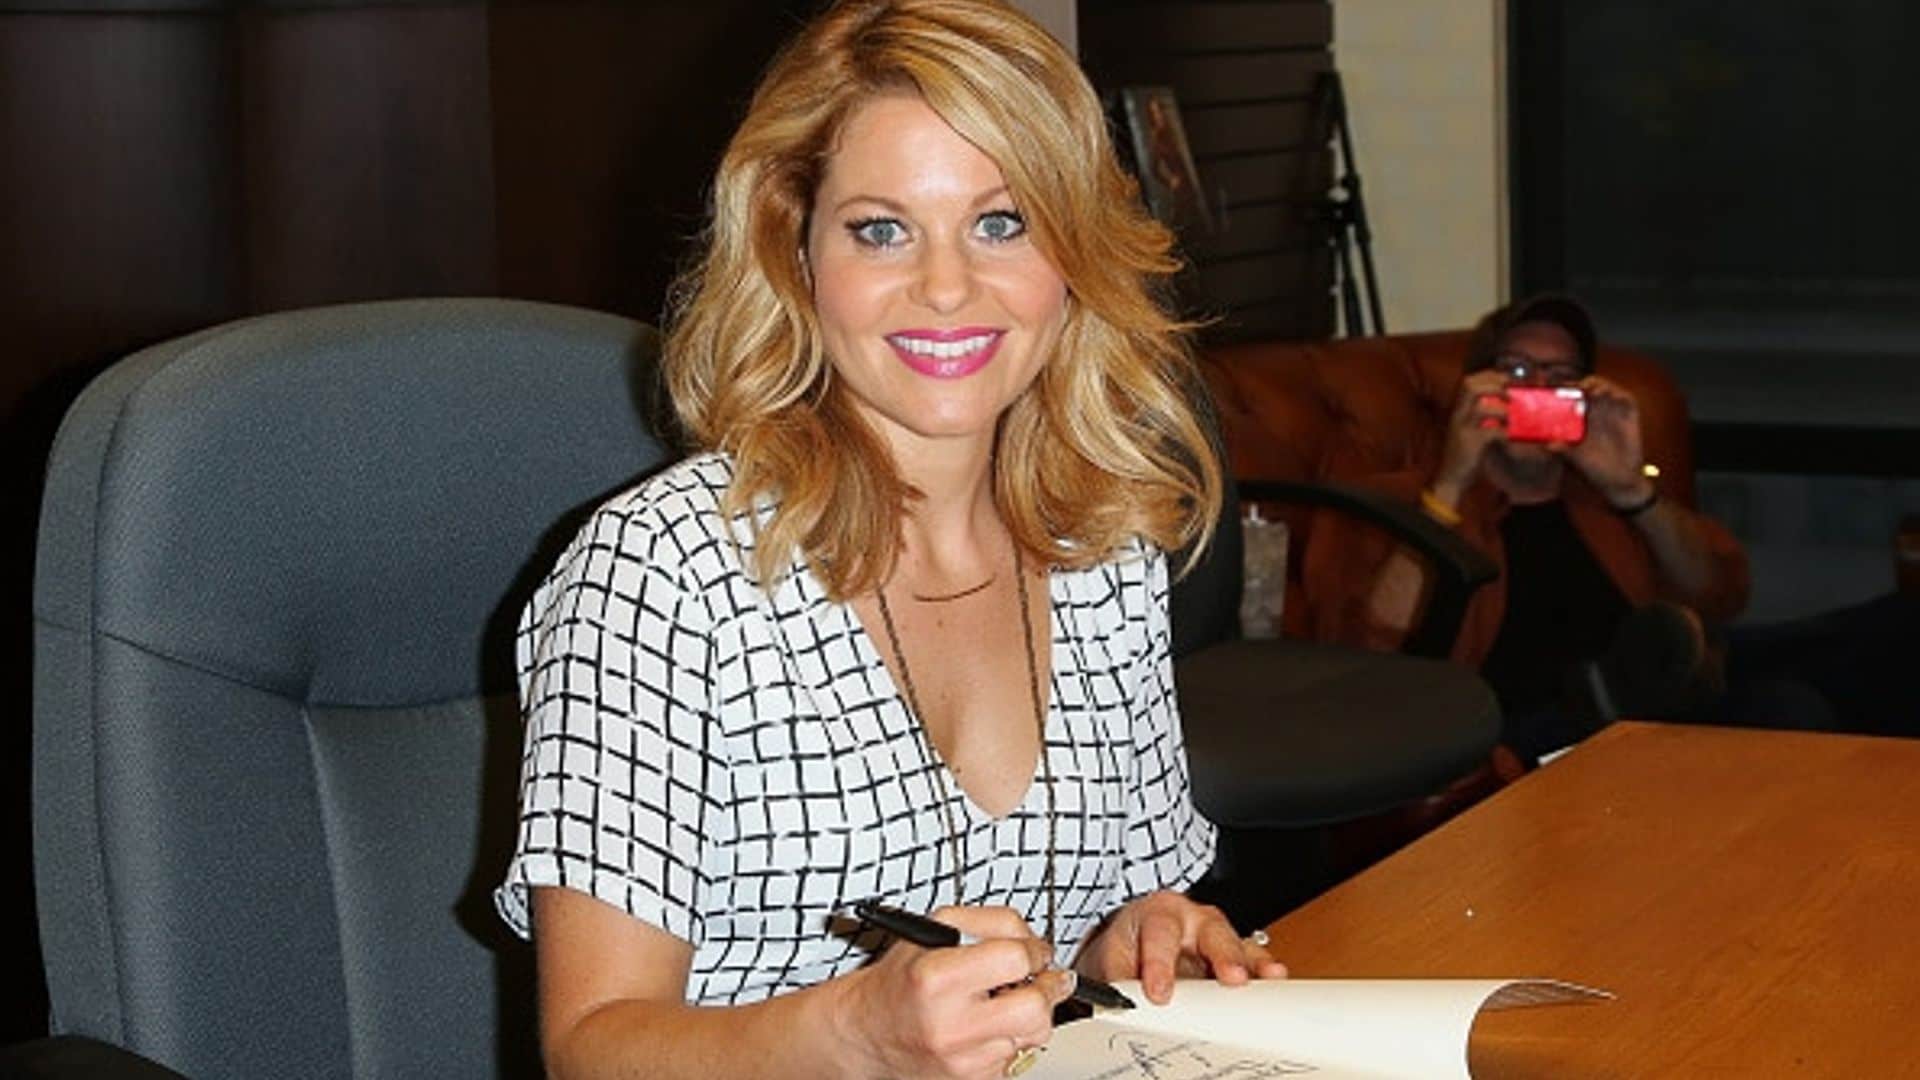 Candace Cameron-Bure's spills on Fuller House: 'We are having a blast'